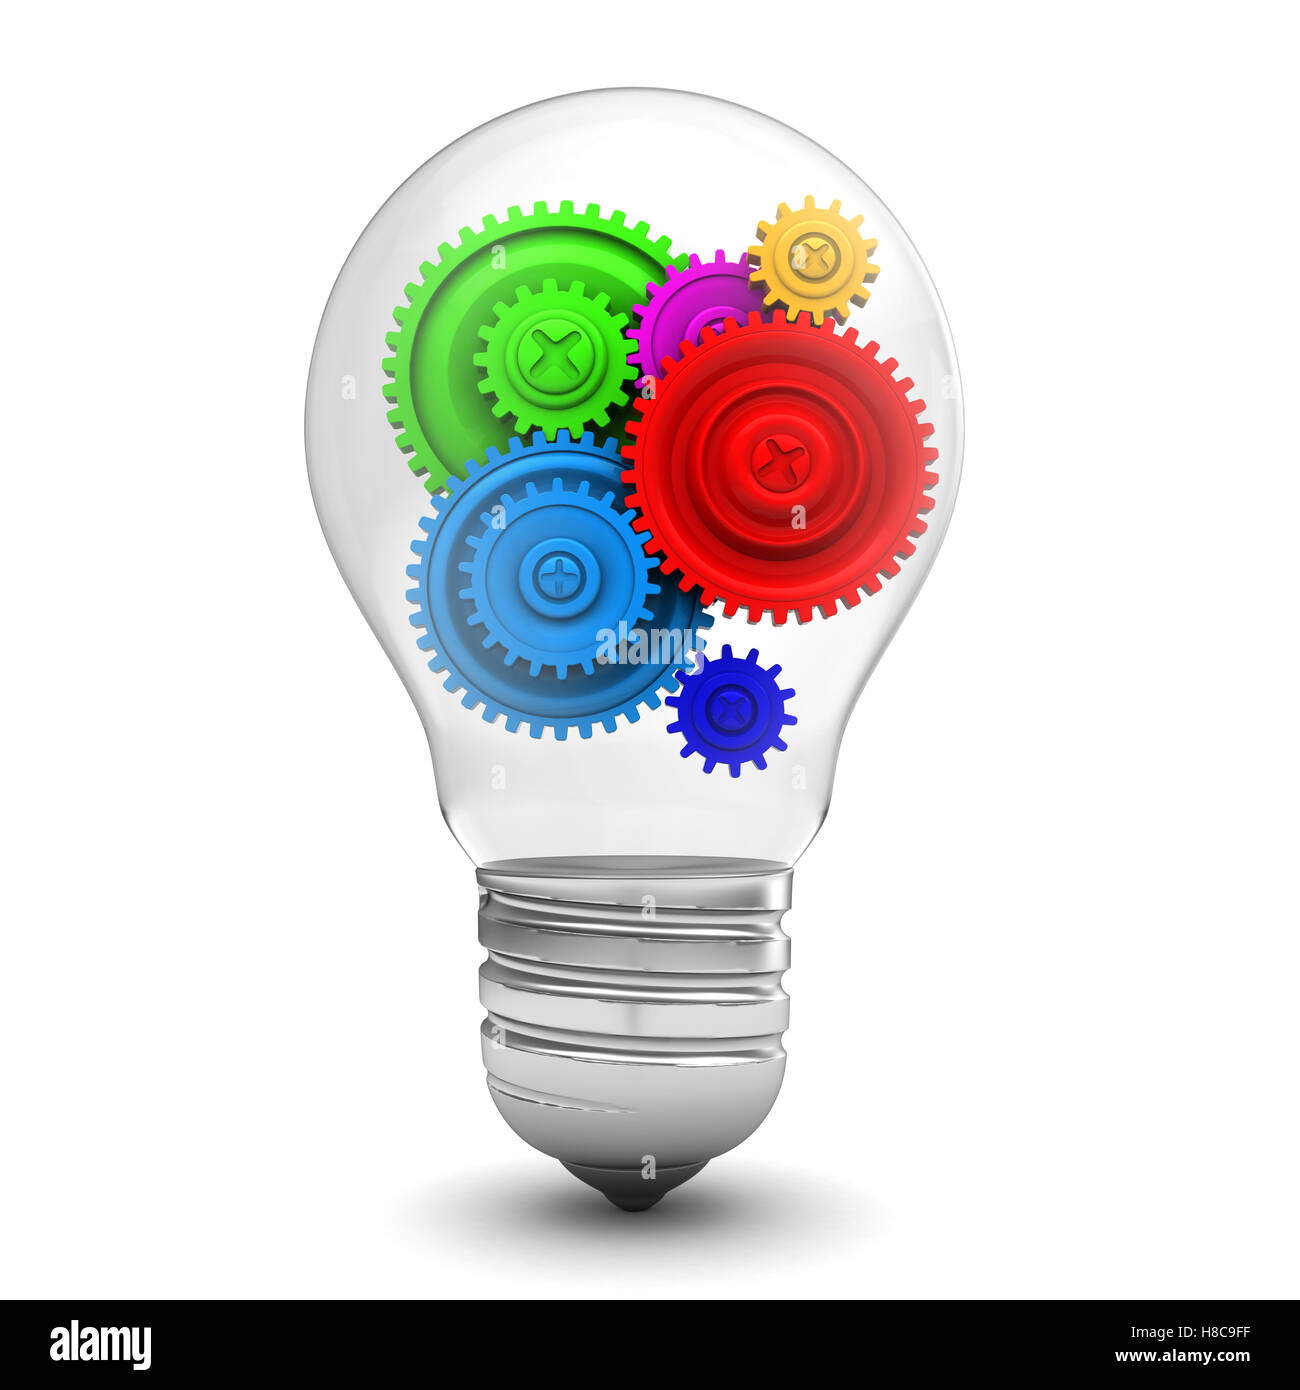 3d illustration of light bulb with colorful gear wheels inside Stock Photo